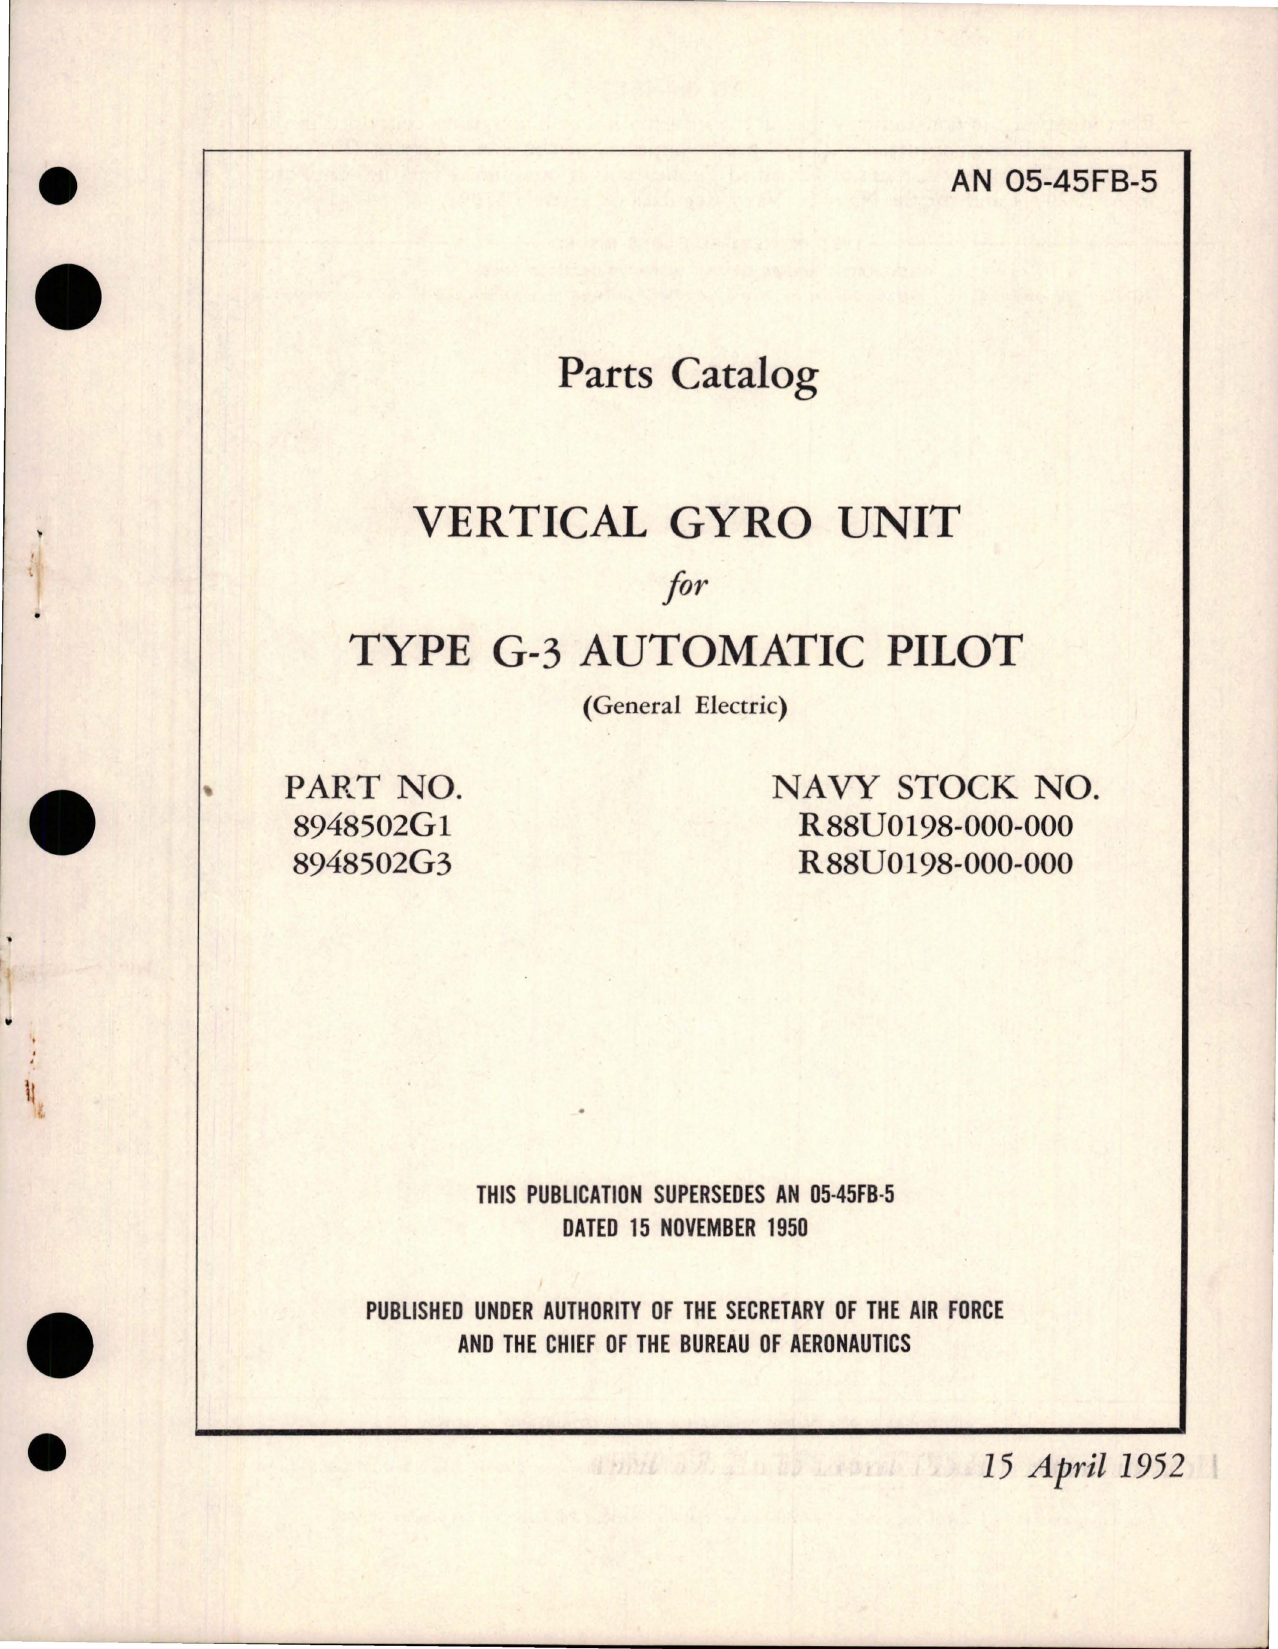 Sample page 1 from AirCorps Library document: Parts Catalog Vertical Gyro Unit for Type G-3 Auto Pilot - Parts 8948502G1 and 8948502G3